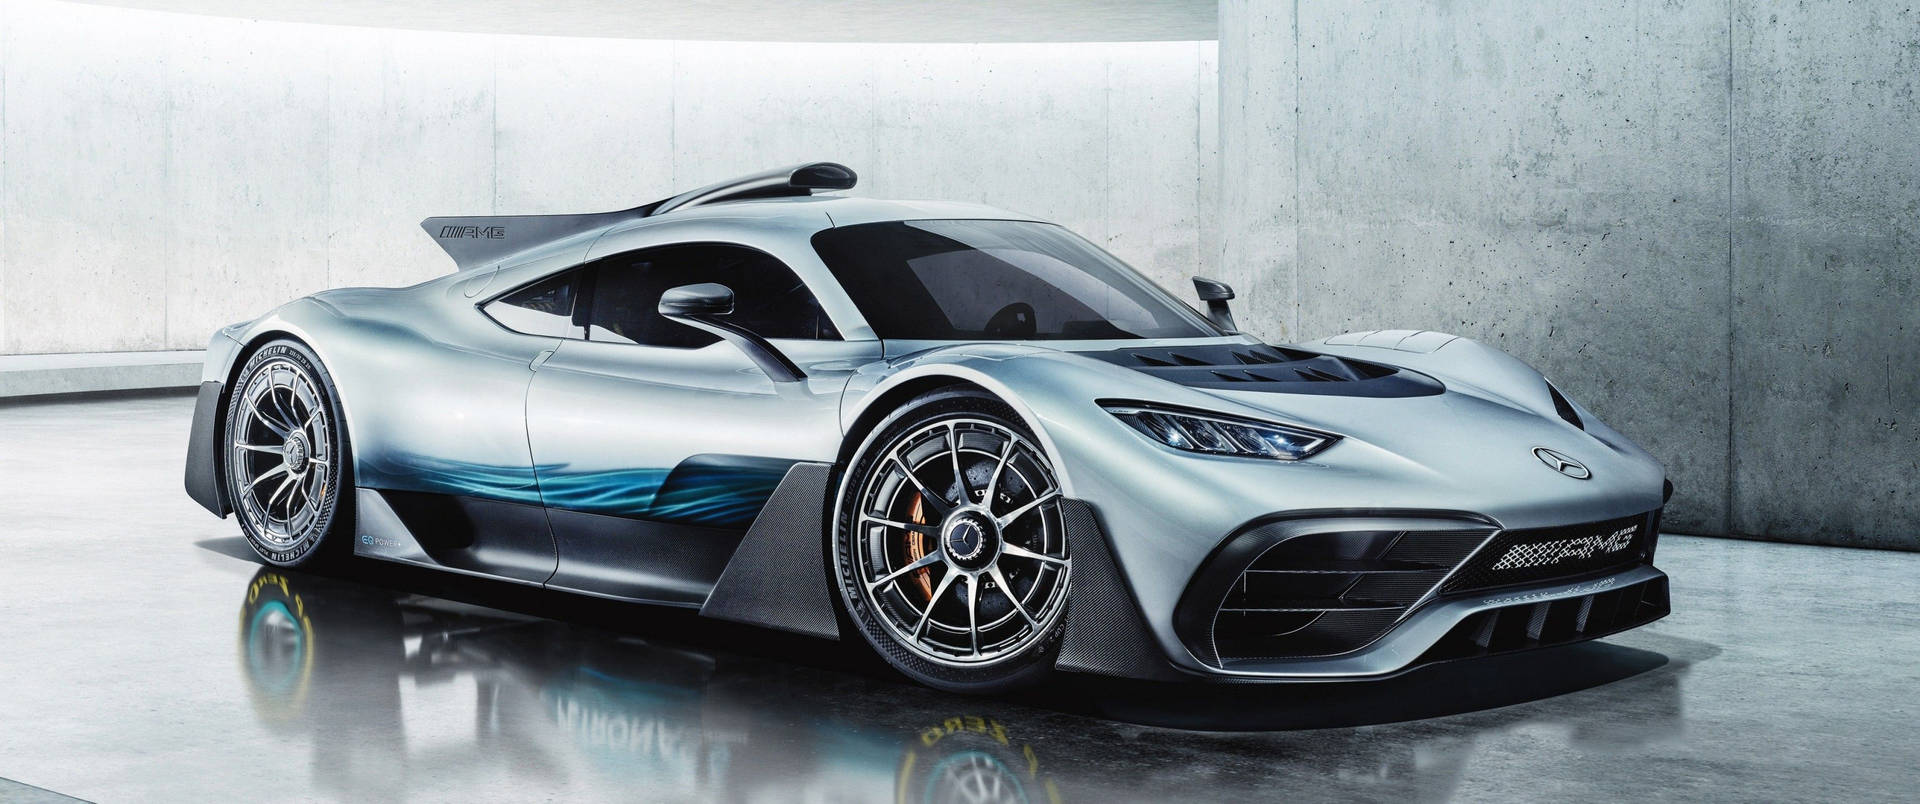 3440x1440 Car Mercedes-amg Project One